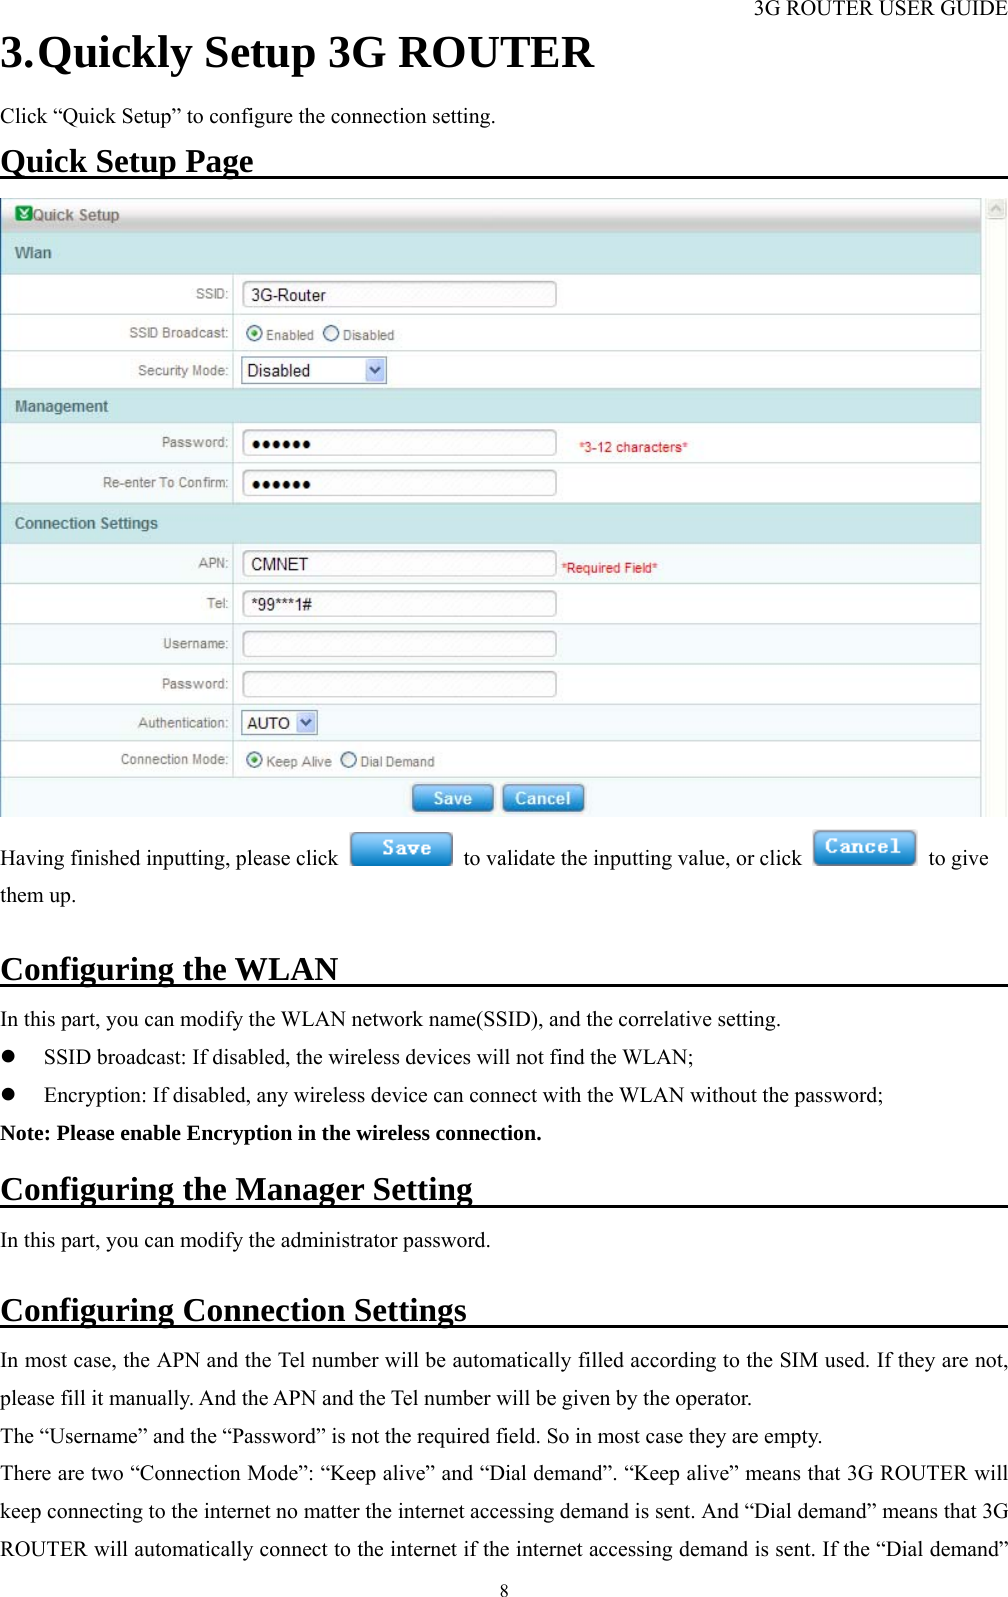 3G ROUTER USER GUIDE  83. Quickly Setup 3G ROUTER Click “Quick Setup” to configure the connection setting. Quick Setup Page                                                      Having finished inputting, please click    to validate the inputting value, or click   to give them up.  Configuring the WLAN                                               In this part, you can modify the WLAN network name(SSID), and the correlative setting. z SSID broadcast: If disabled, the wireless devices will not find the WLAN; z Encryption: If disabled, any wireless device can connect with the WLAN without the password; Note: Please enable Encryption in the wireless connection.  Configuring the Manager Setting                                          In this part, you can modify the administrator password.  Configuring Connection Settings                                            In most case, the APN and the Tel number will be automatically filled according to the SIM used. If they are not, please fill it manually. And the APN and the Tel number will be given by the operator. The “Username” and the “Password” is not the required field. So in most case they are empty.   There are two “Connection Mode”: “Keep alive” and “Dial demand”. “Keep alive” means that 3G ROUTER will keep connecting to the internet no matter the internet accessing demand is sent. And “Dial demand” means that 3G ROUTER will automatically connect to the internet if the internet accessing demand is sent. If the “Dial demand” 